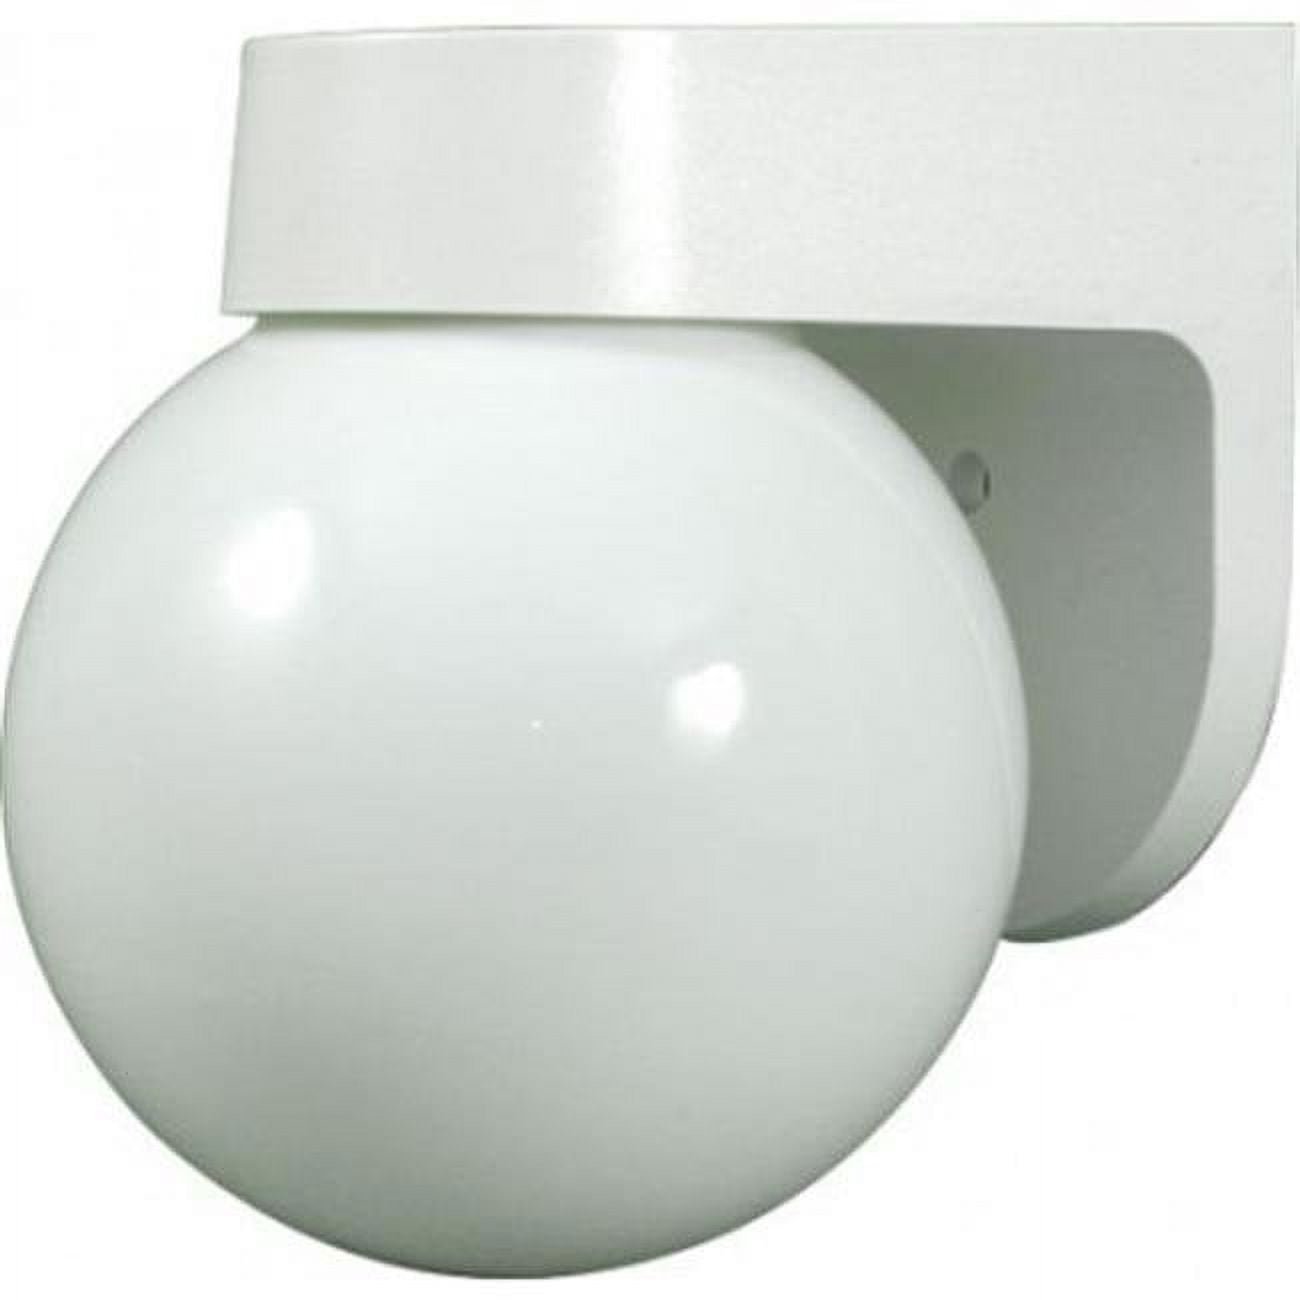 P-glb-506 6 In. Polycarbonate Globe With 3.06 In. Threaded Neck - White